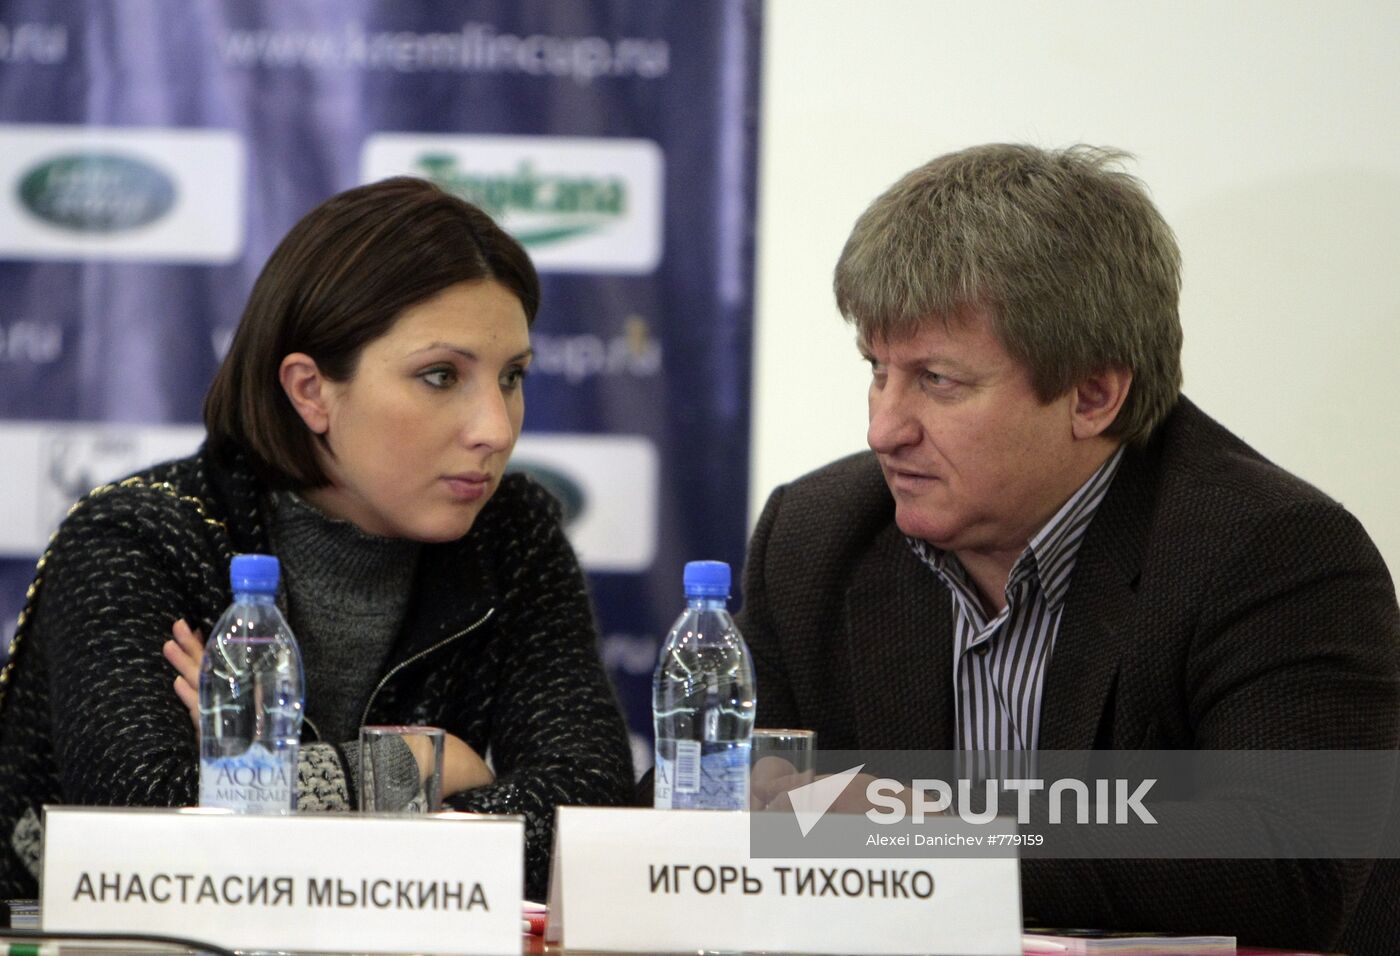 News confrence on forthcoming tennis events in Moscow